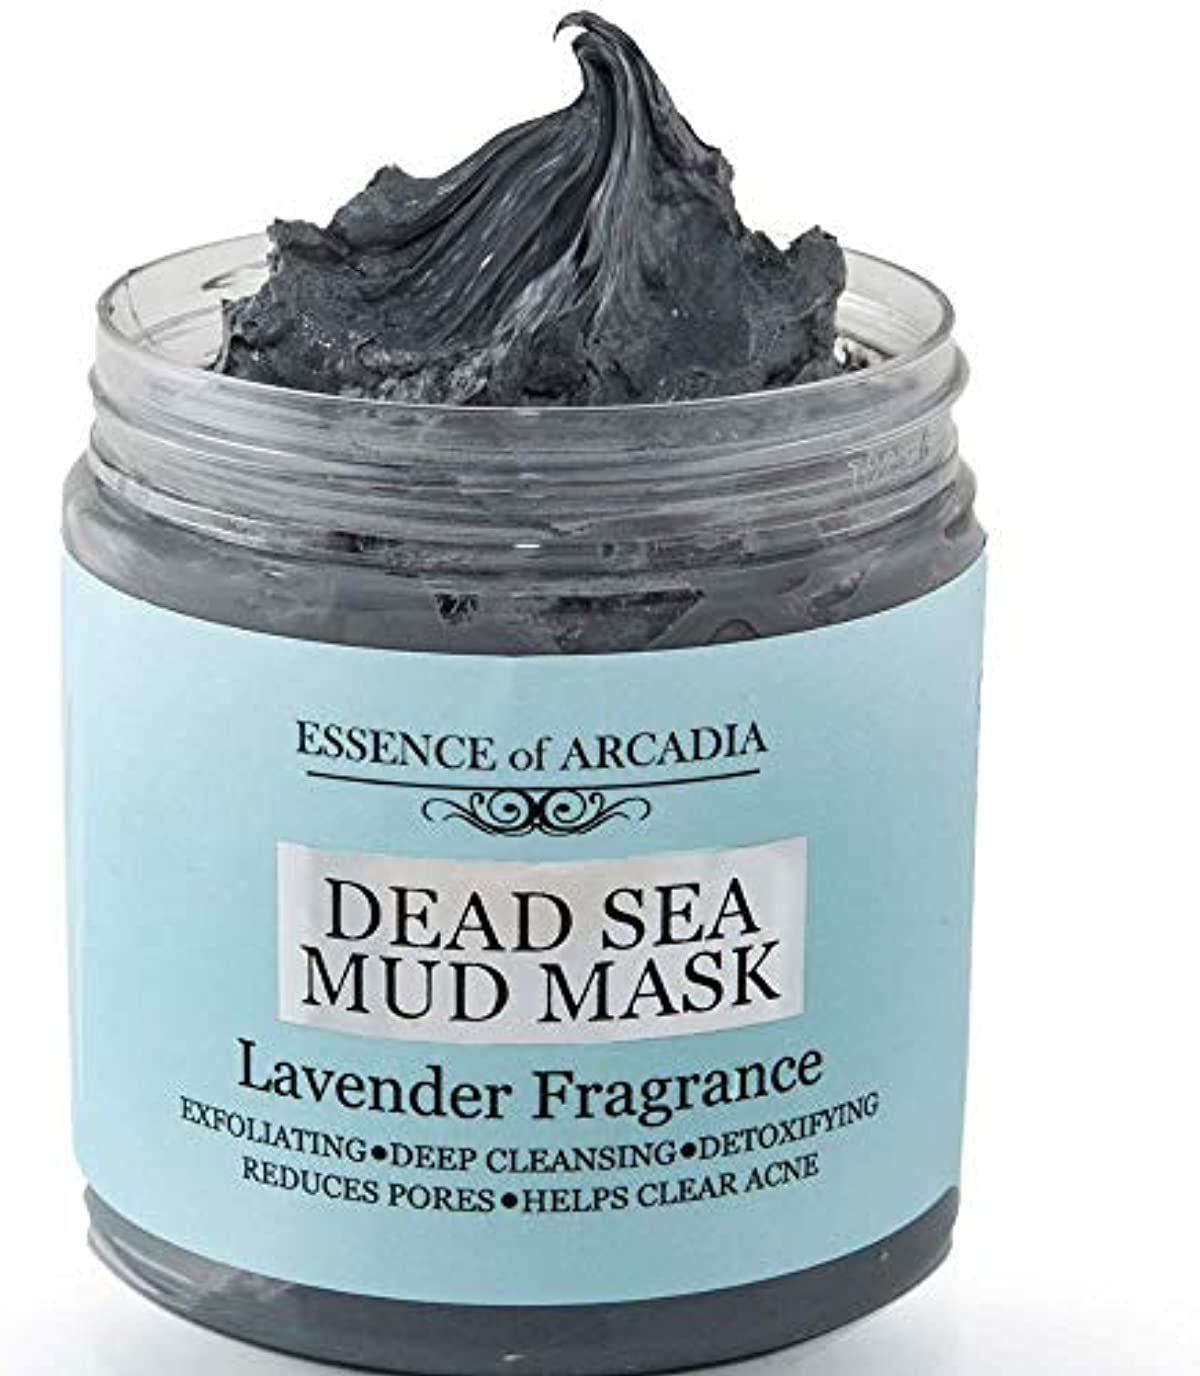 Dead Sea Mineral Mud Mask Scented with Lavender for Face and Body - 100{e8d9282db550ebc63a99b95c7c5a013fa9fd2d4b10125cea4923f0e921d6899e} Natural Minerals - Minimize Pores, Remove Blackheads, Reduce Acne and Wrinkles for Men and Women, a Healthier Complexion 8.8 oz